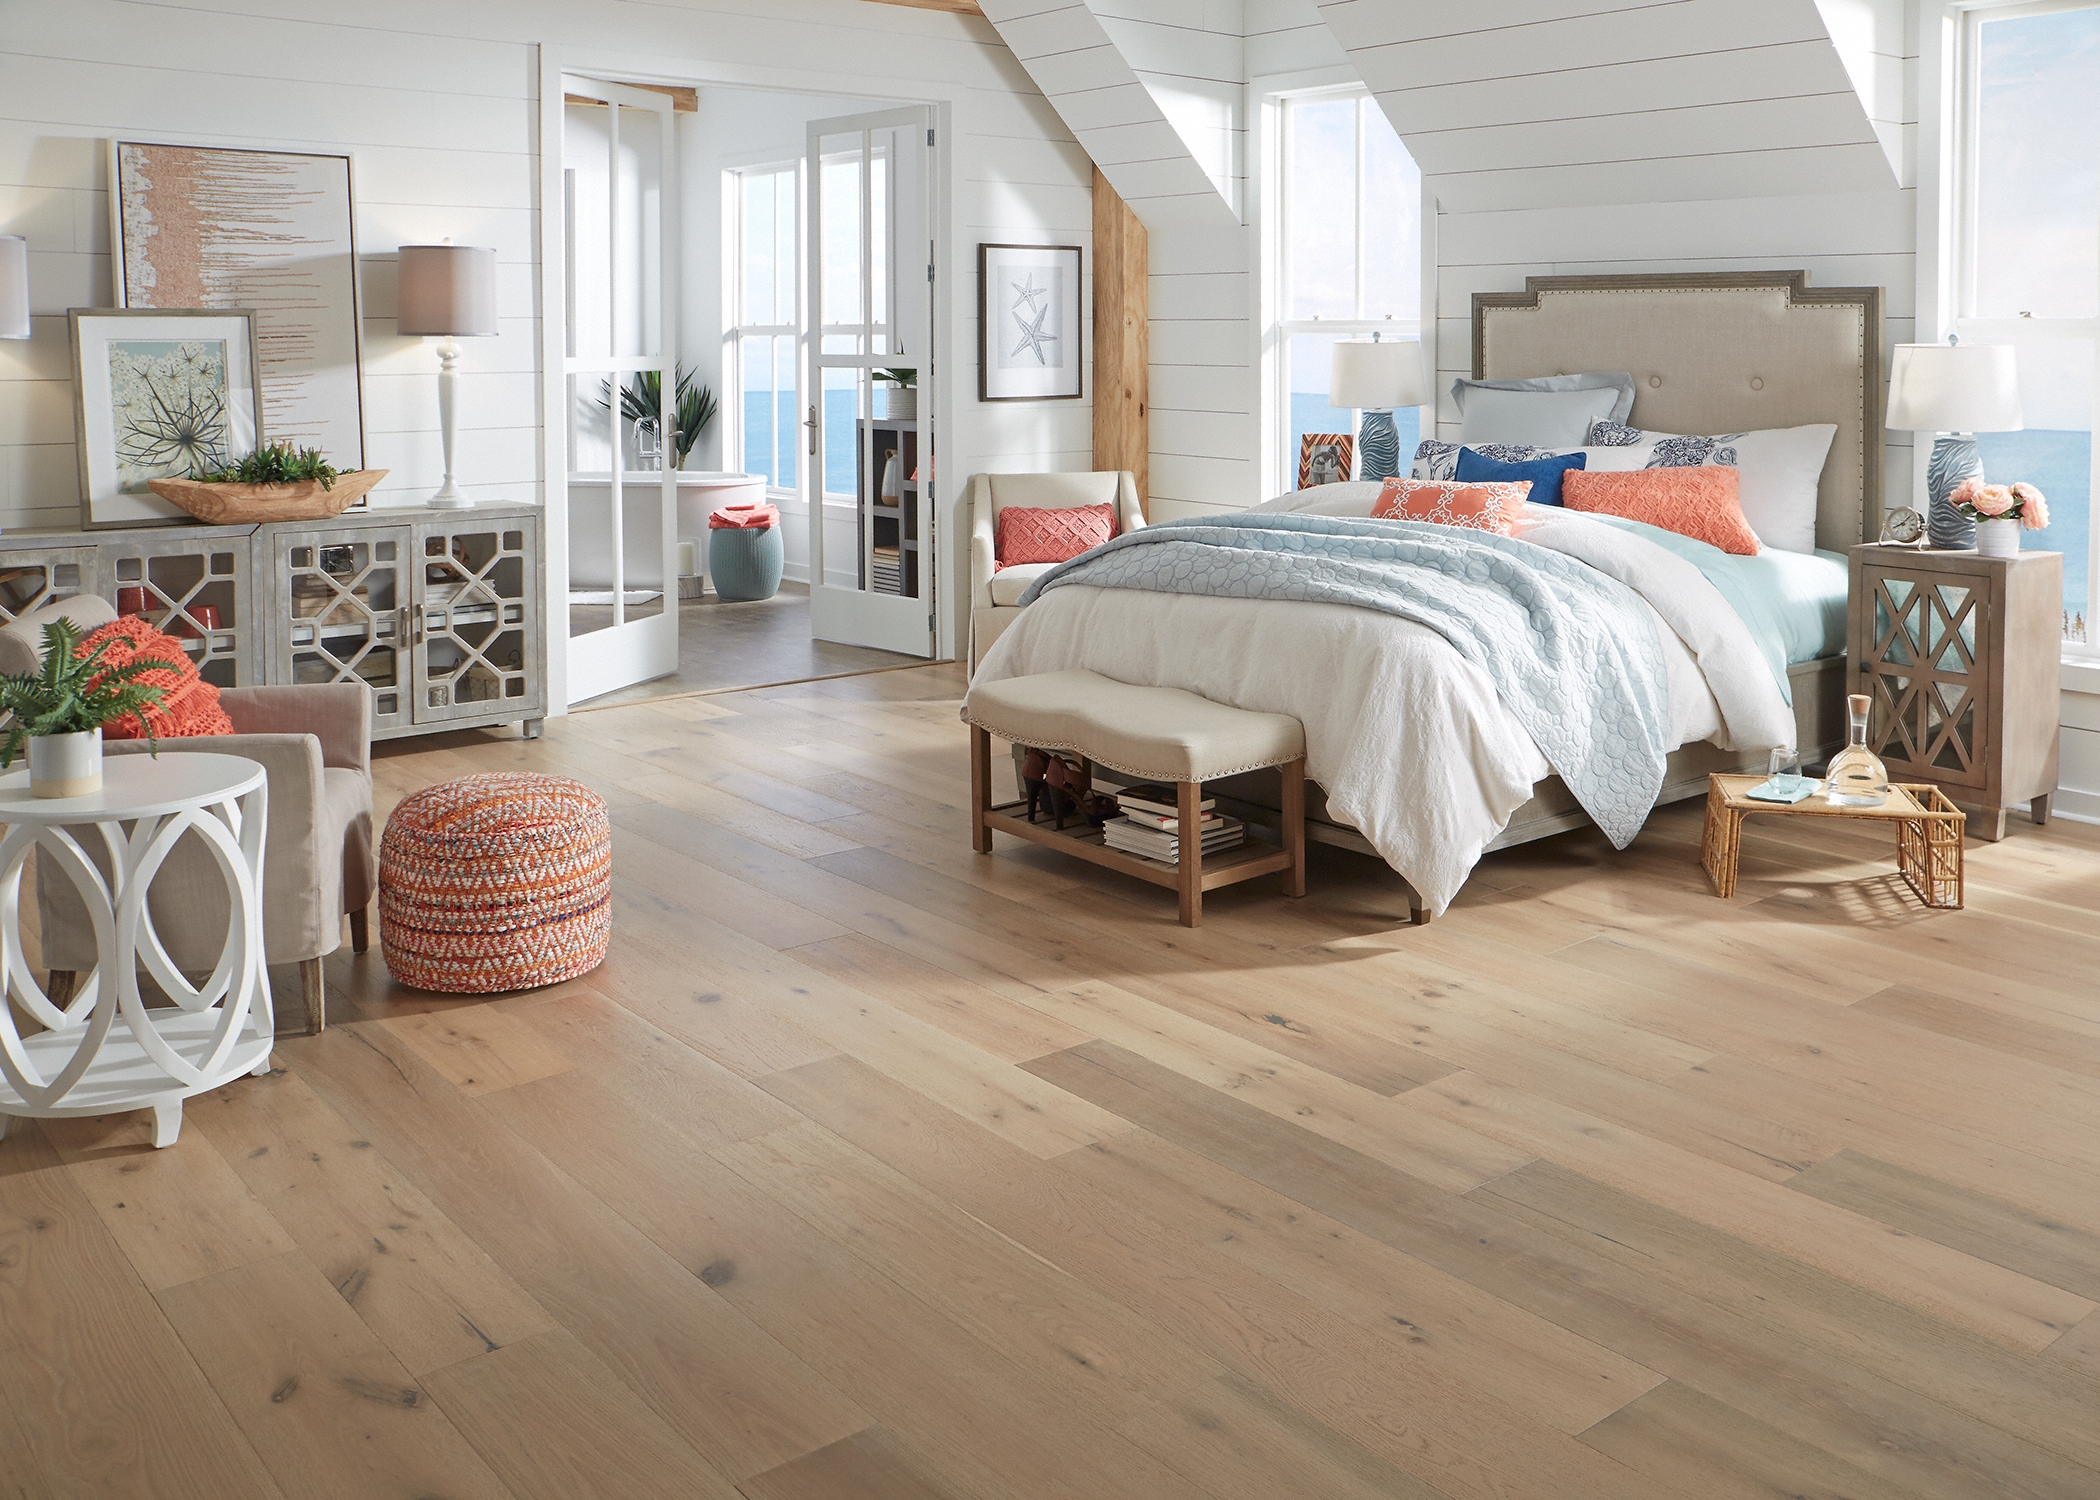 blonde distressed engineered hardwood floor in bedroom with beige headboard and pale green and orange bedding plus white furniture and shiplap on walls